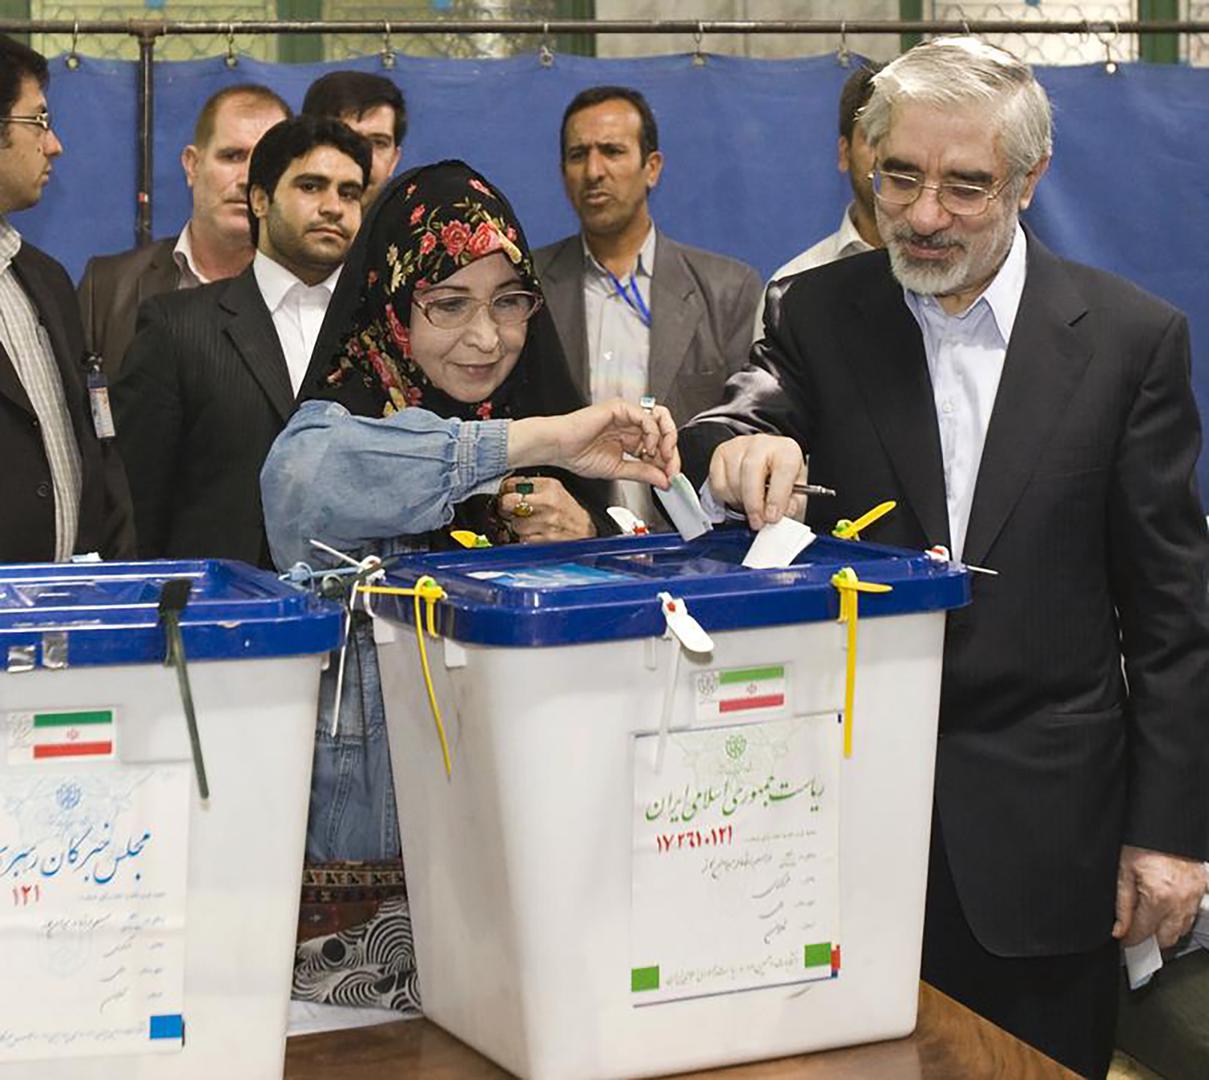 Caption: Presidential candidate Mirhossein Mousavi (R) and his his wife Zahra Rahnavard cast their ballots during the Iranian presidential election in southern Tehran June 12, 2009. © 2009 Reuters